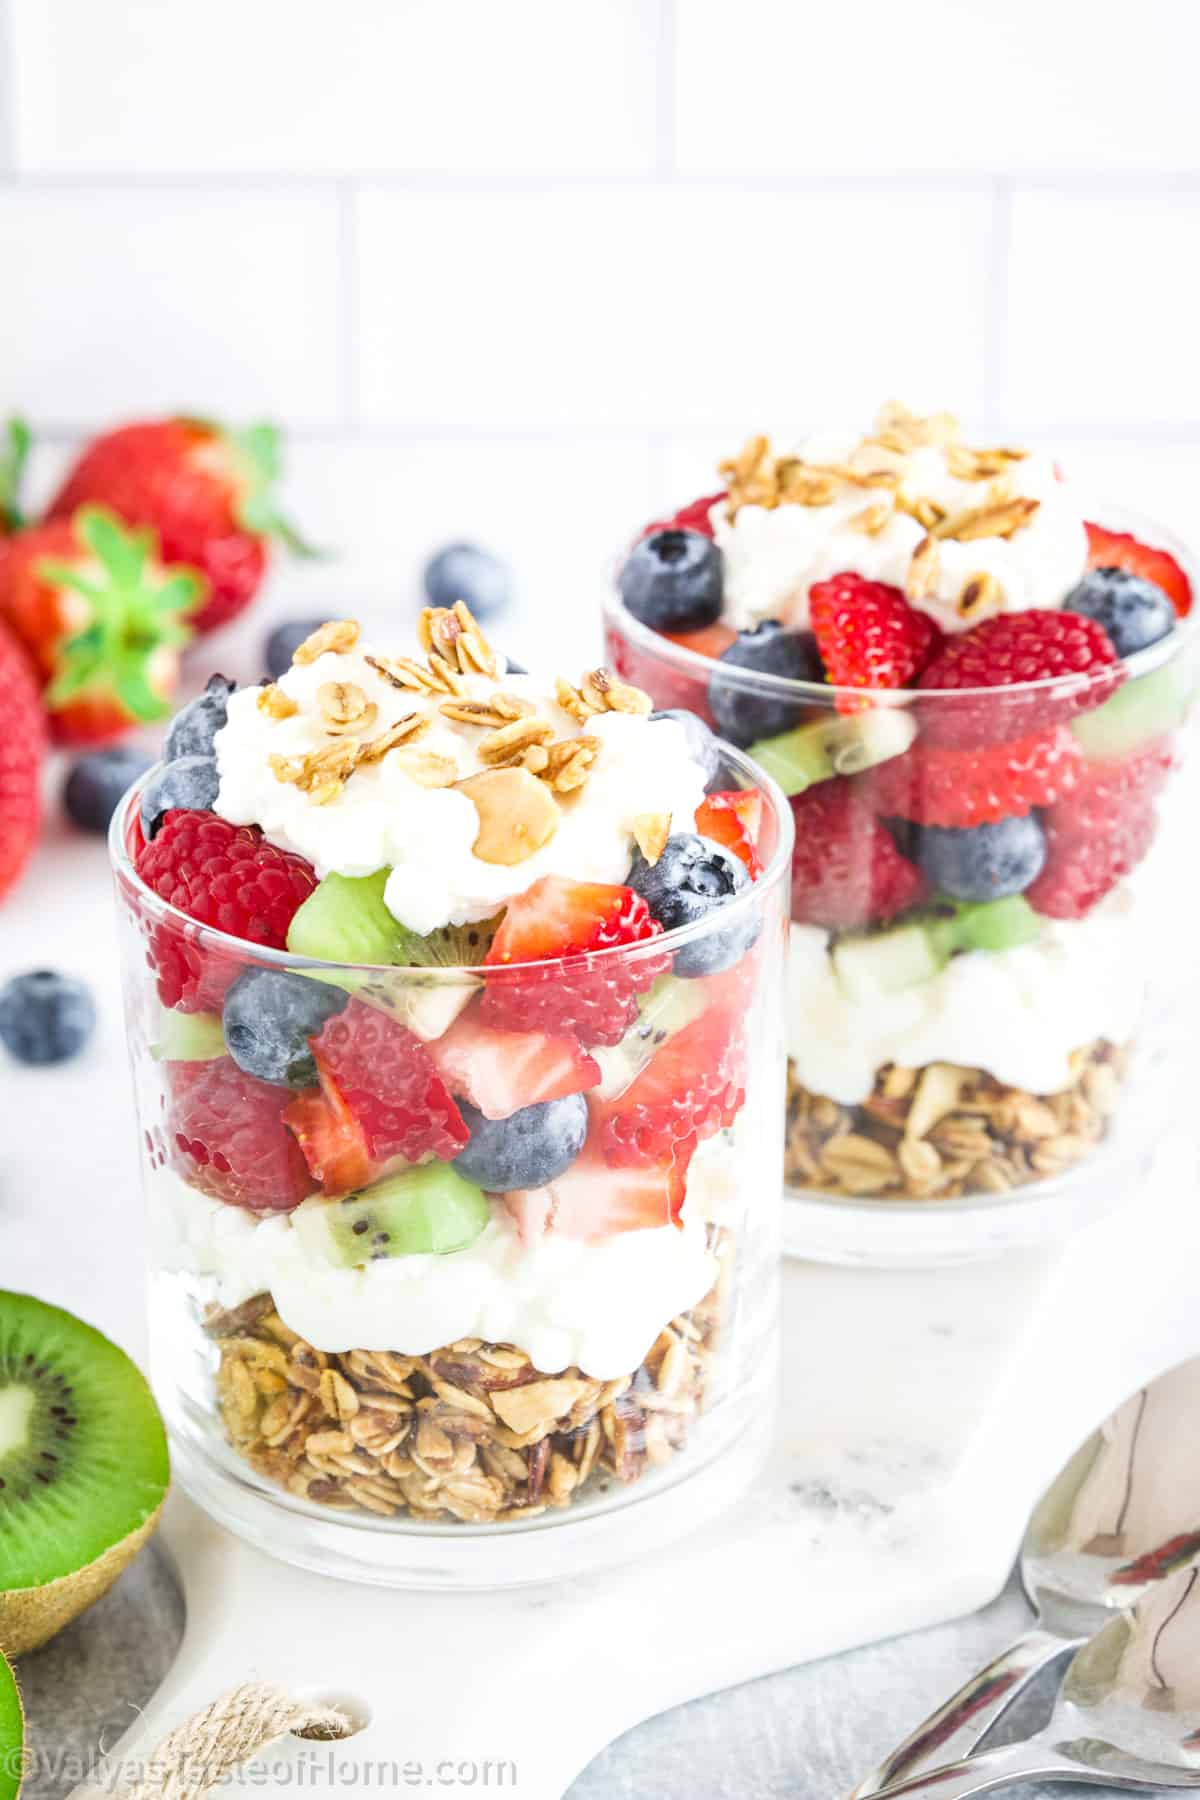 This 10-minute cottage cheese parfait recipe has the creamy texture of the cottage cheese combined with the freshness of the fruit for a powerful energy boost.